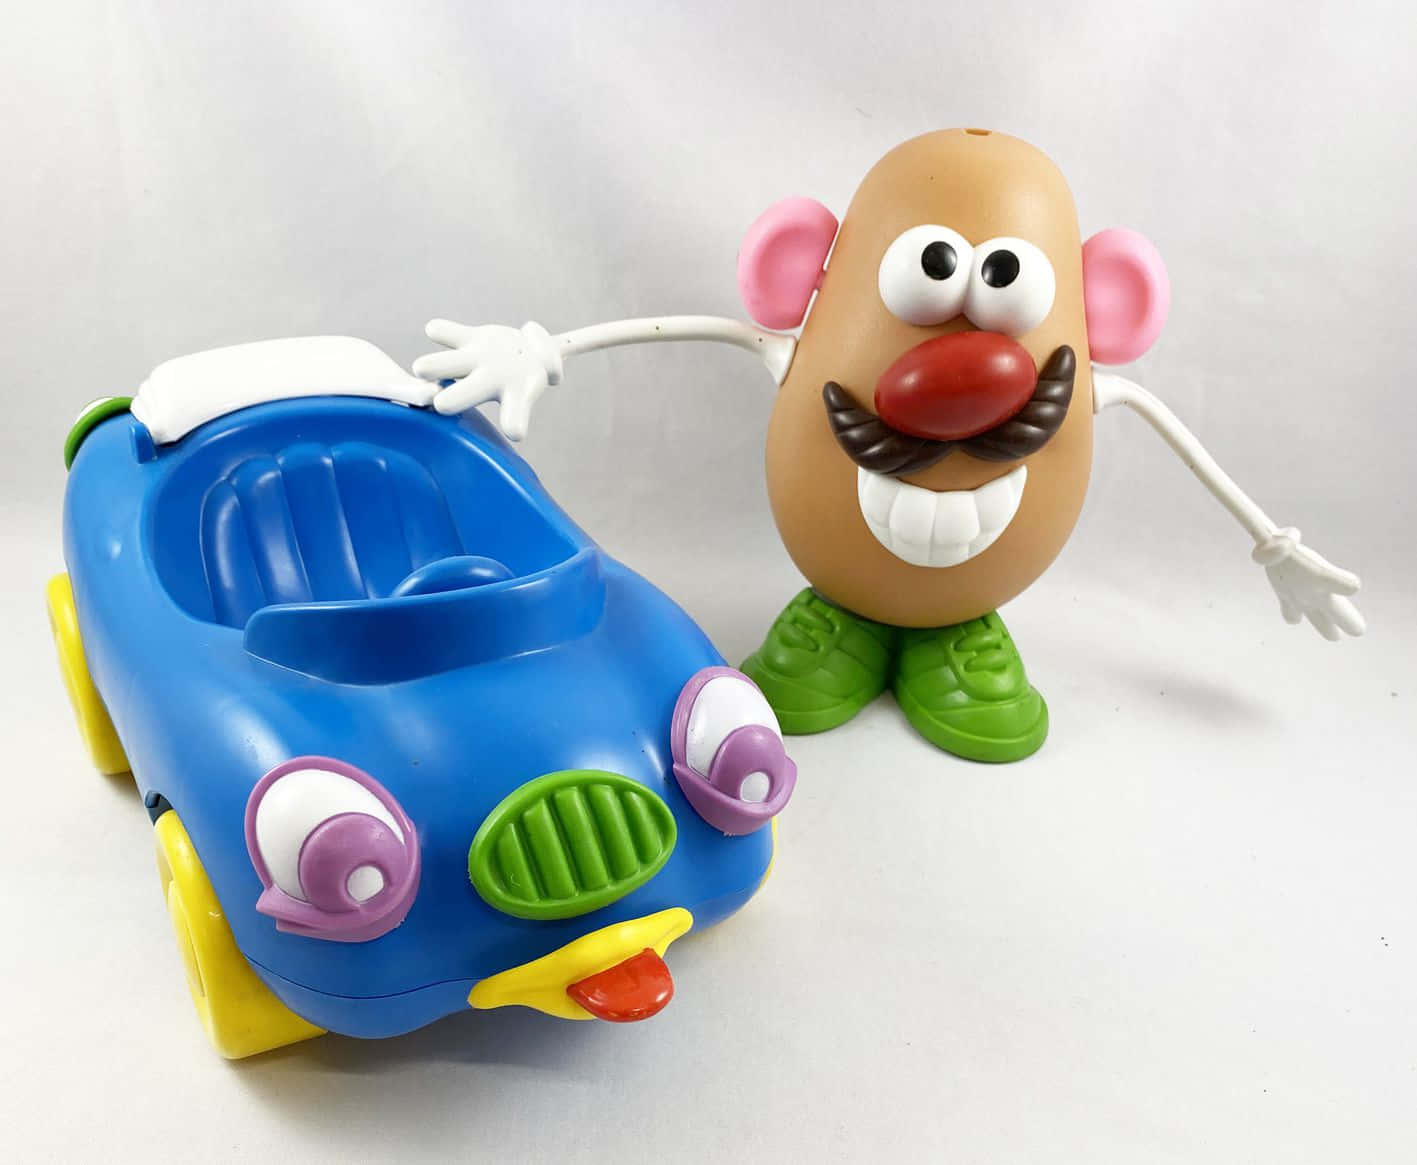 Mr Potato Head is an iconic figure in the Toy Story franchise